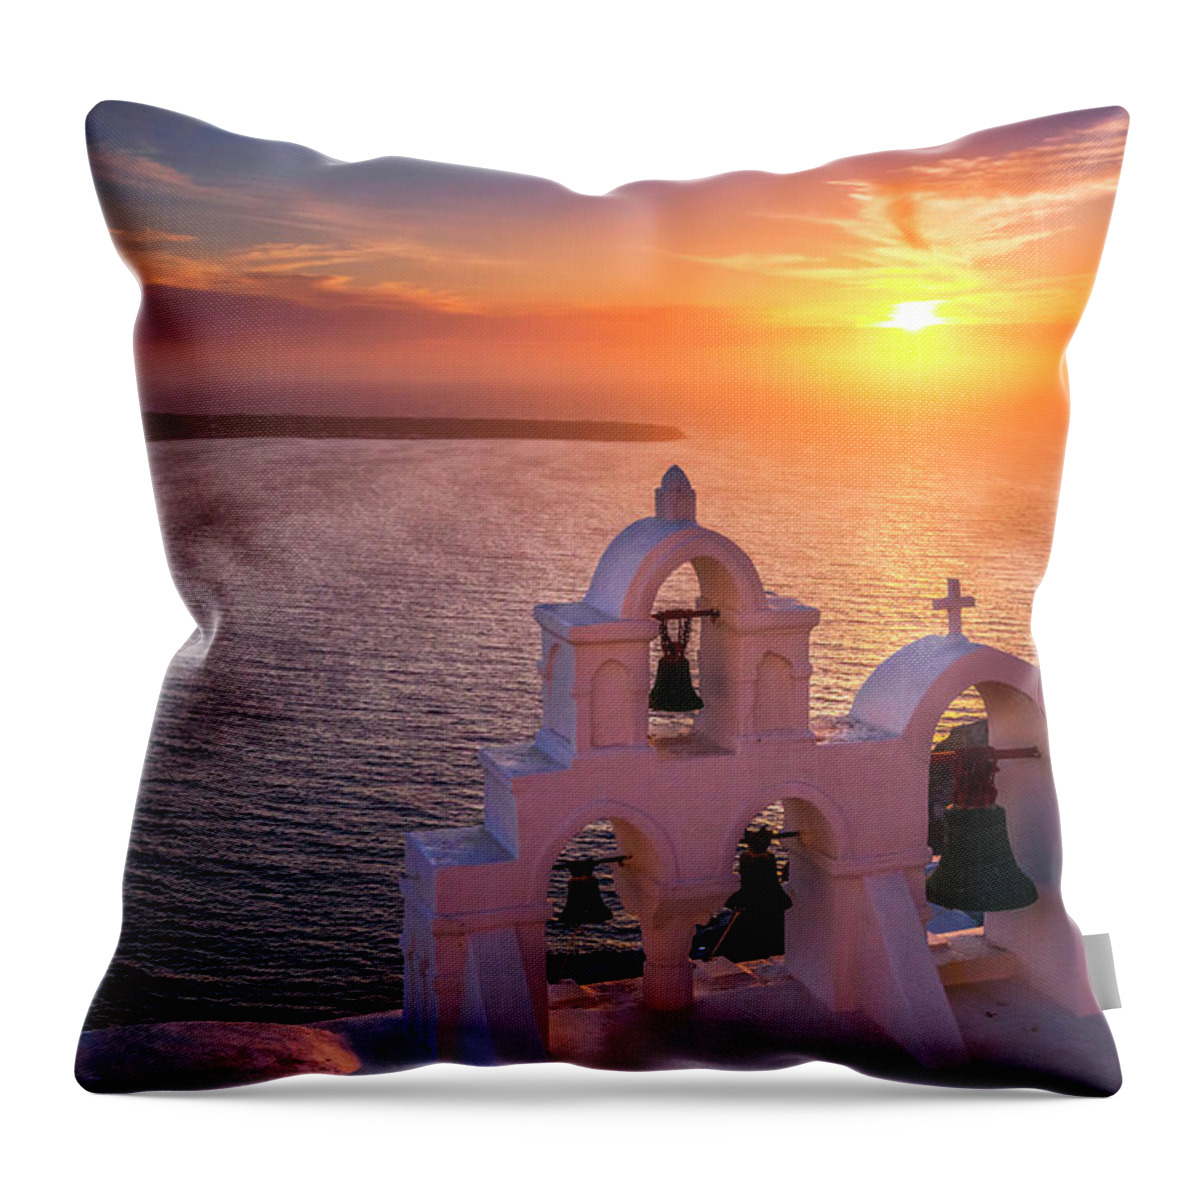 Greece Throw Pillow featuring the photograph Santorini Sunset by Evgeni Dinev